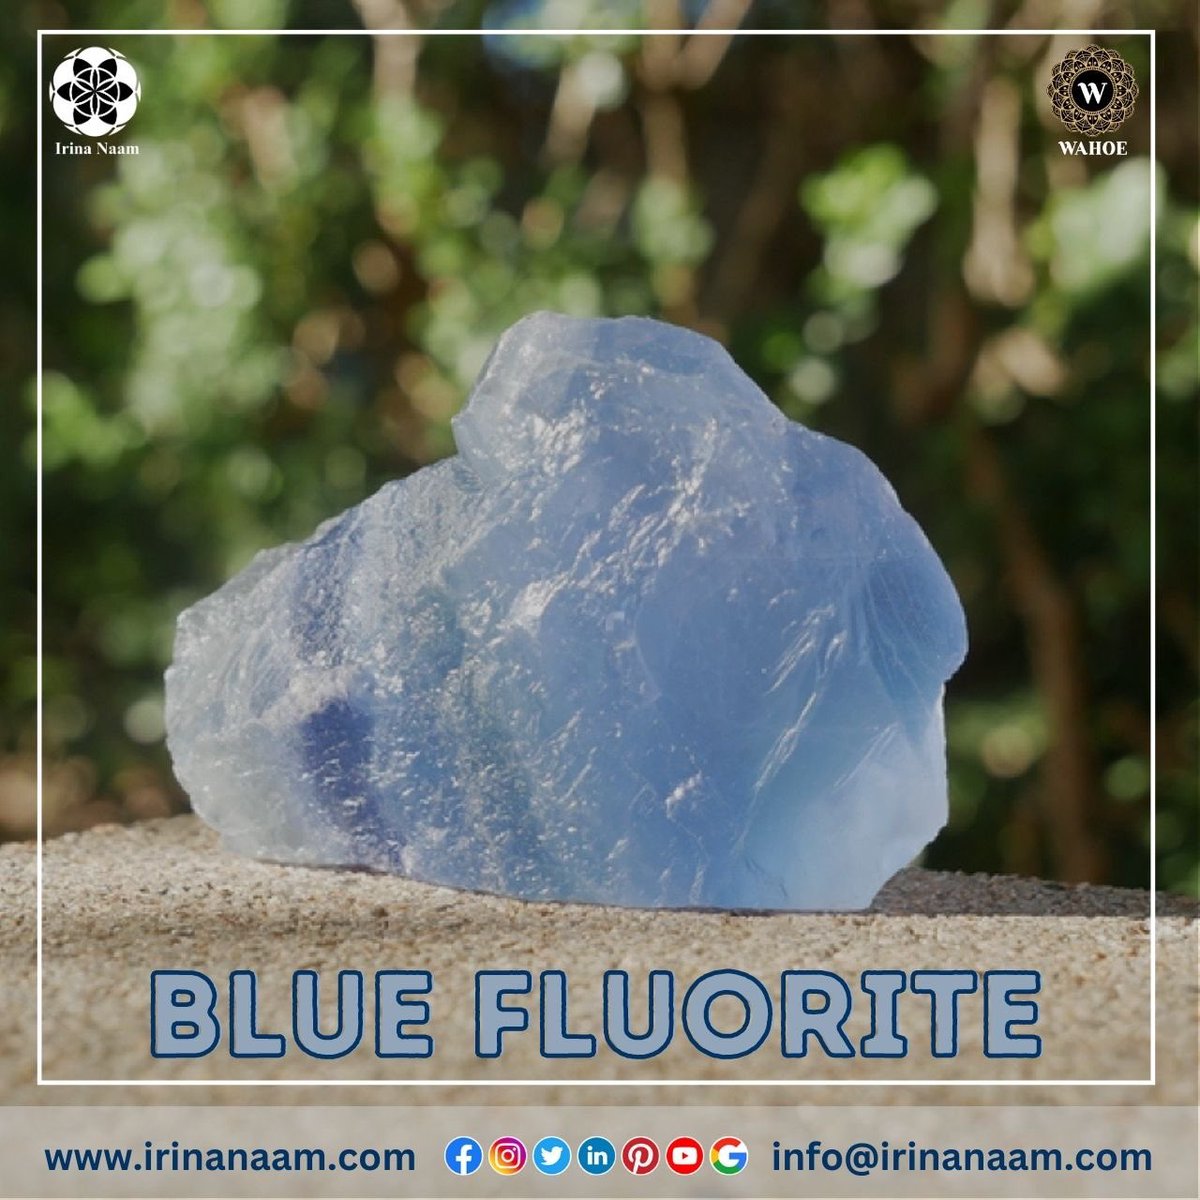 The calming, logical energy of blue fluorite promotes orderly, systematic thinking and the ability to focus the brain's operations on a specific goal. It is an amazing talisman for meticulous record-keeping and promotes clear.
#IrinaNaam #Wahoe #BlueFluorite #Blue #Fluorite